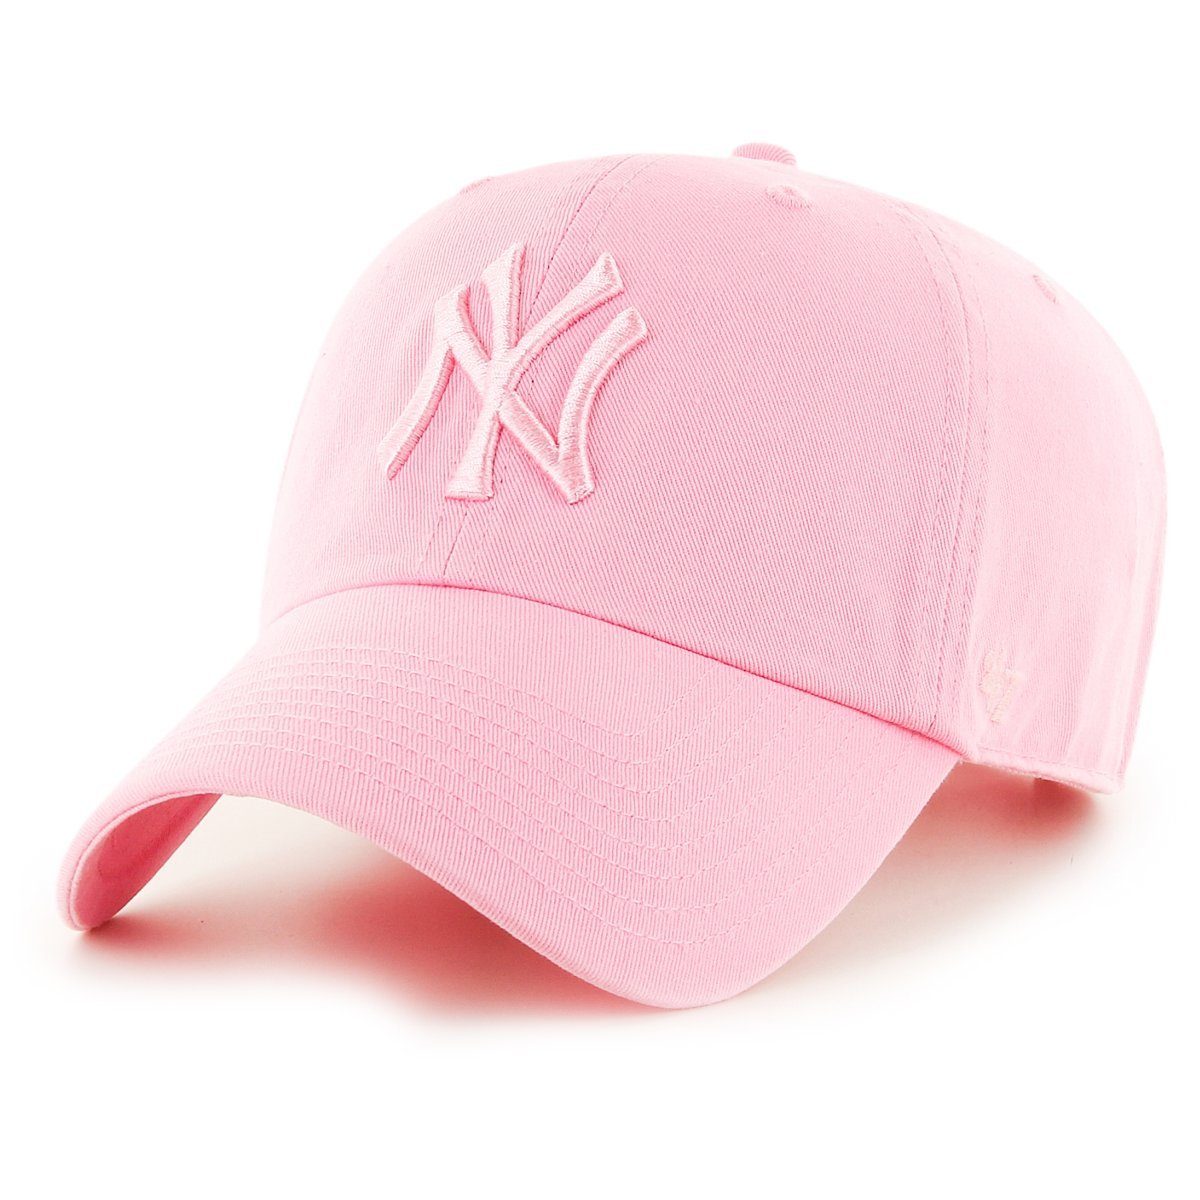 '47 Brand Baseball Cap Relaxed Fit CLEAN UP New York Yankees